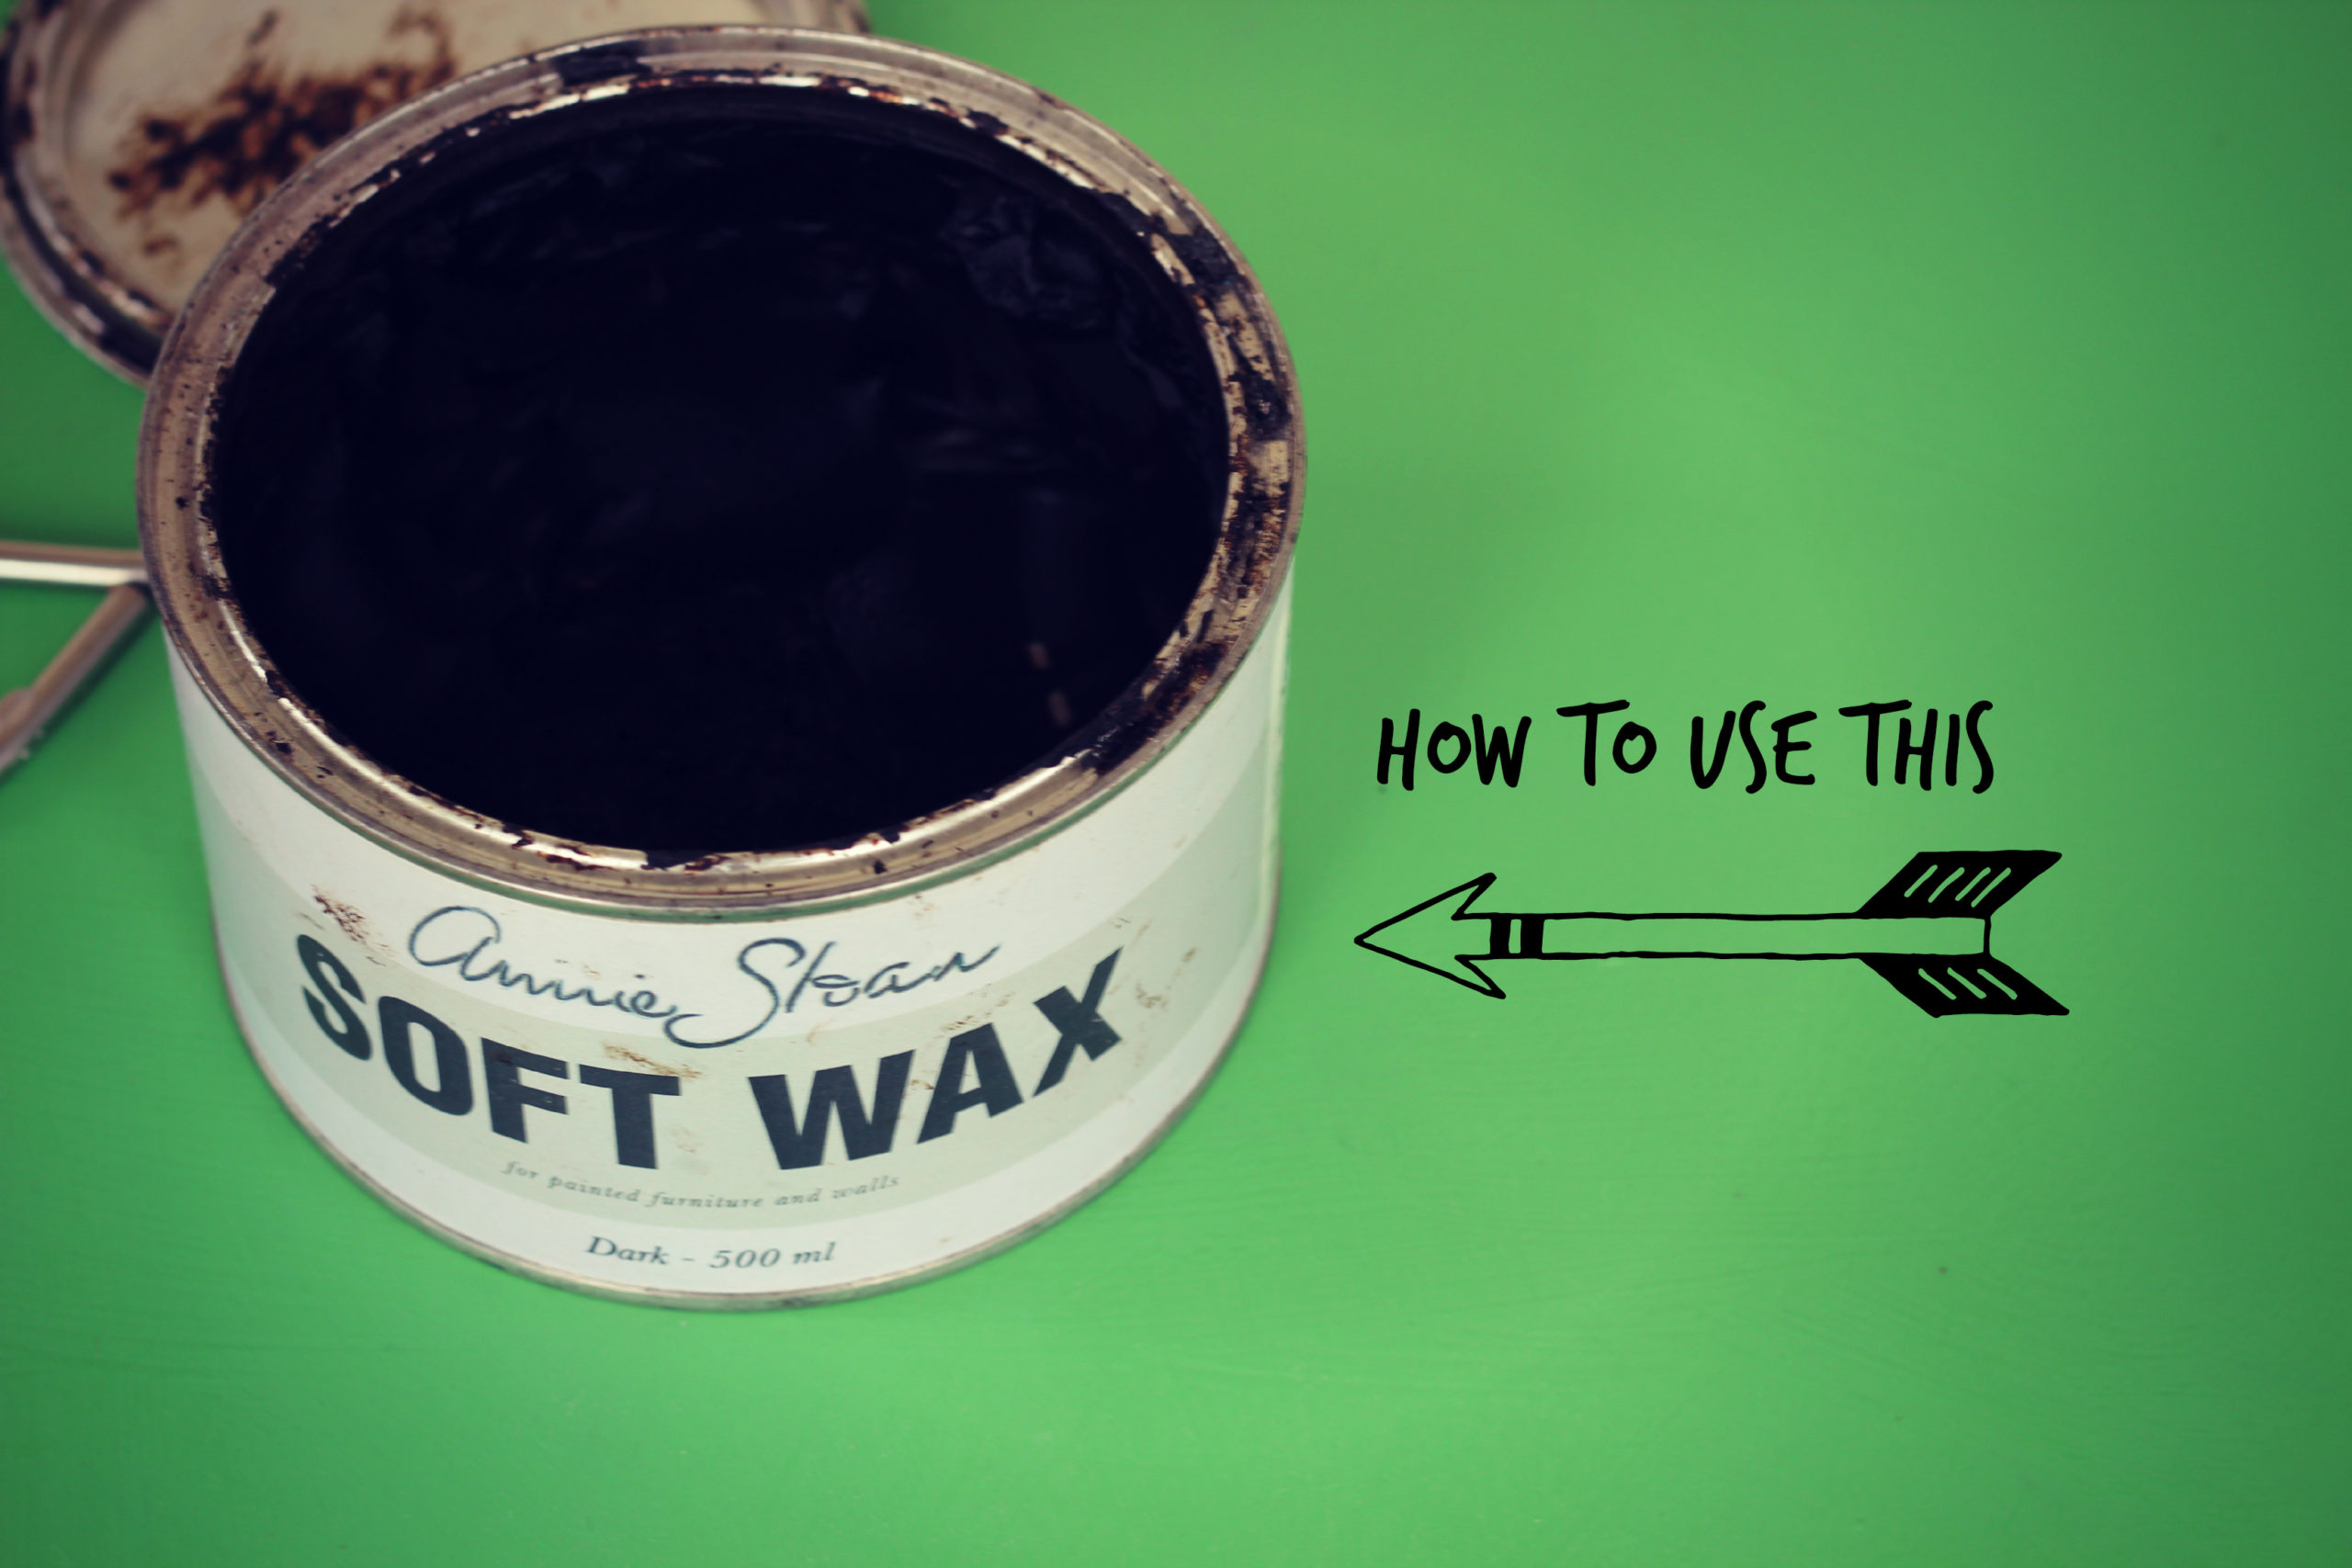 Why Wax Chalk Paint? Everything You Need to Know